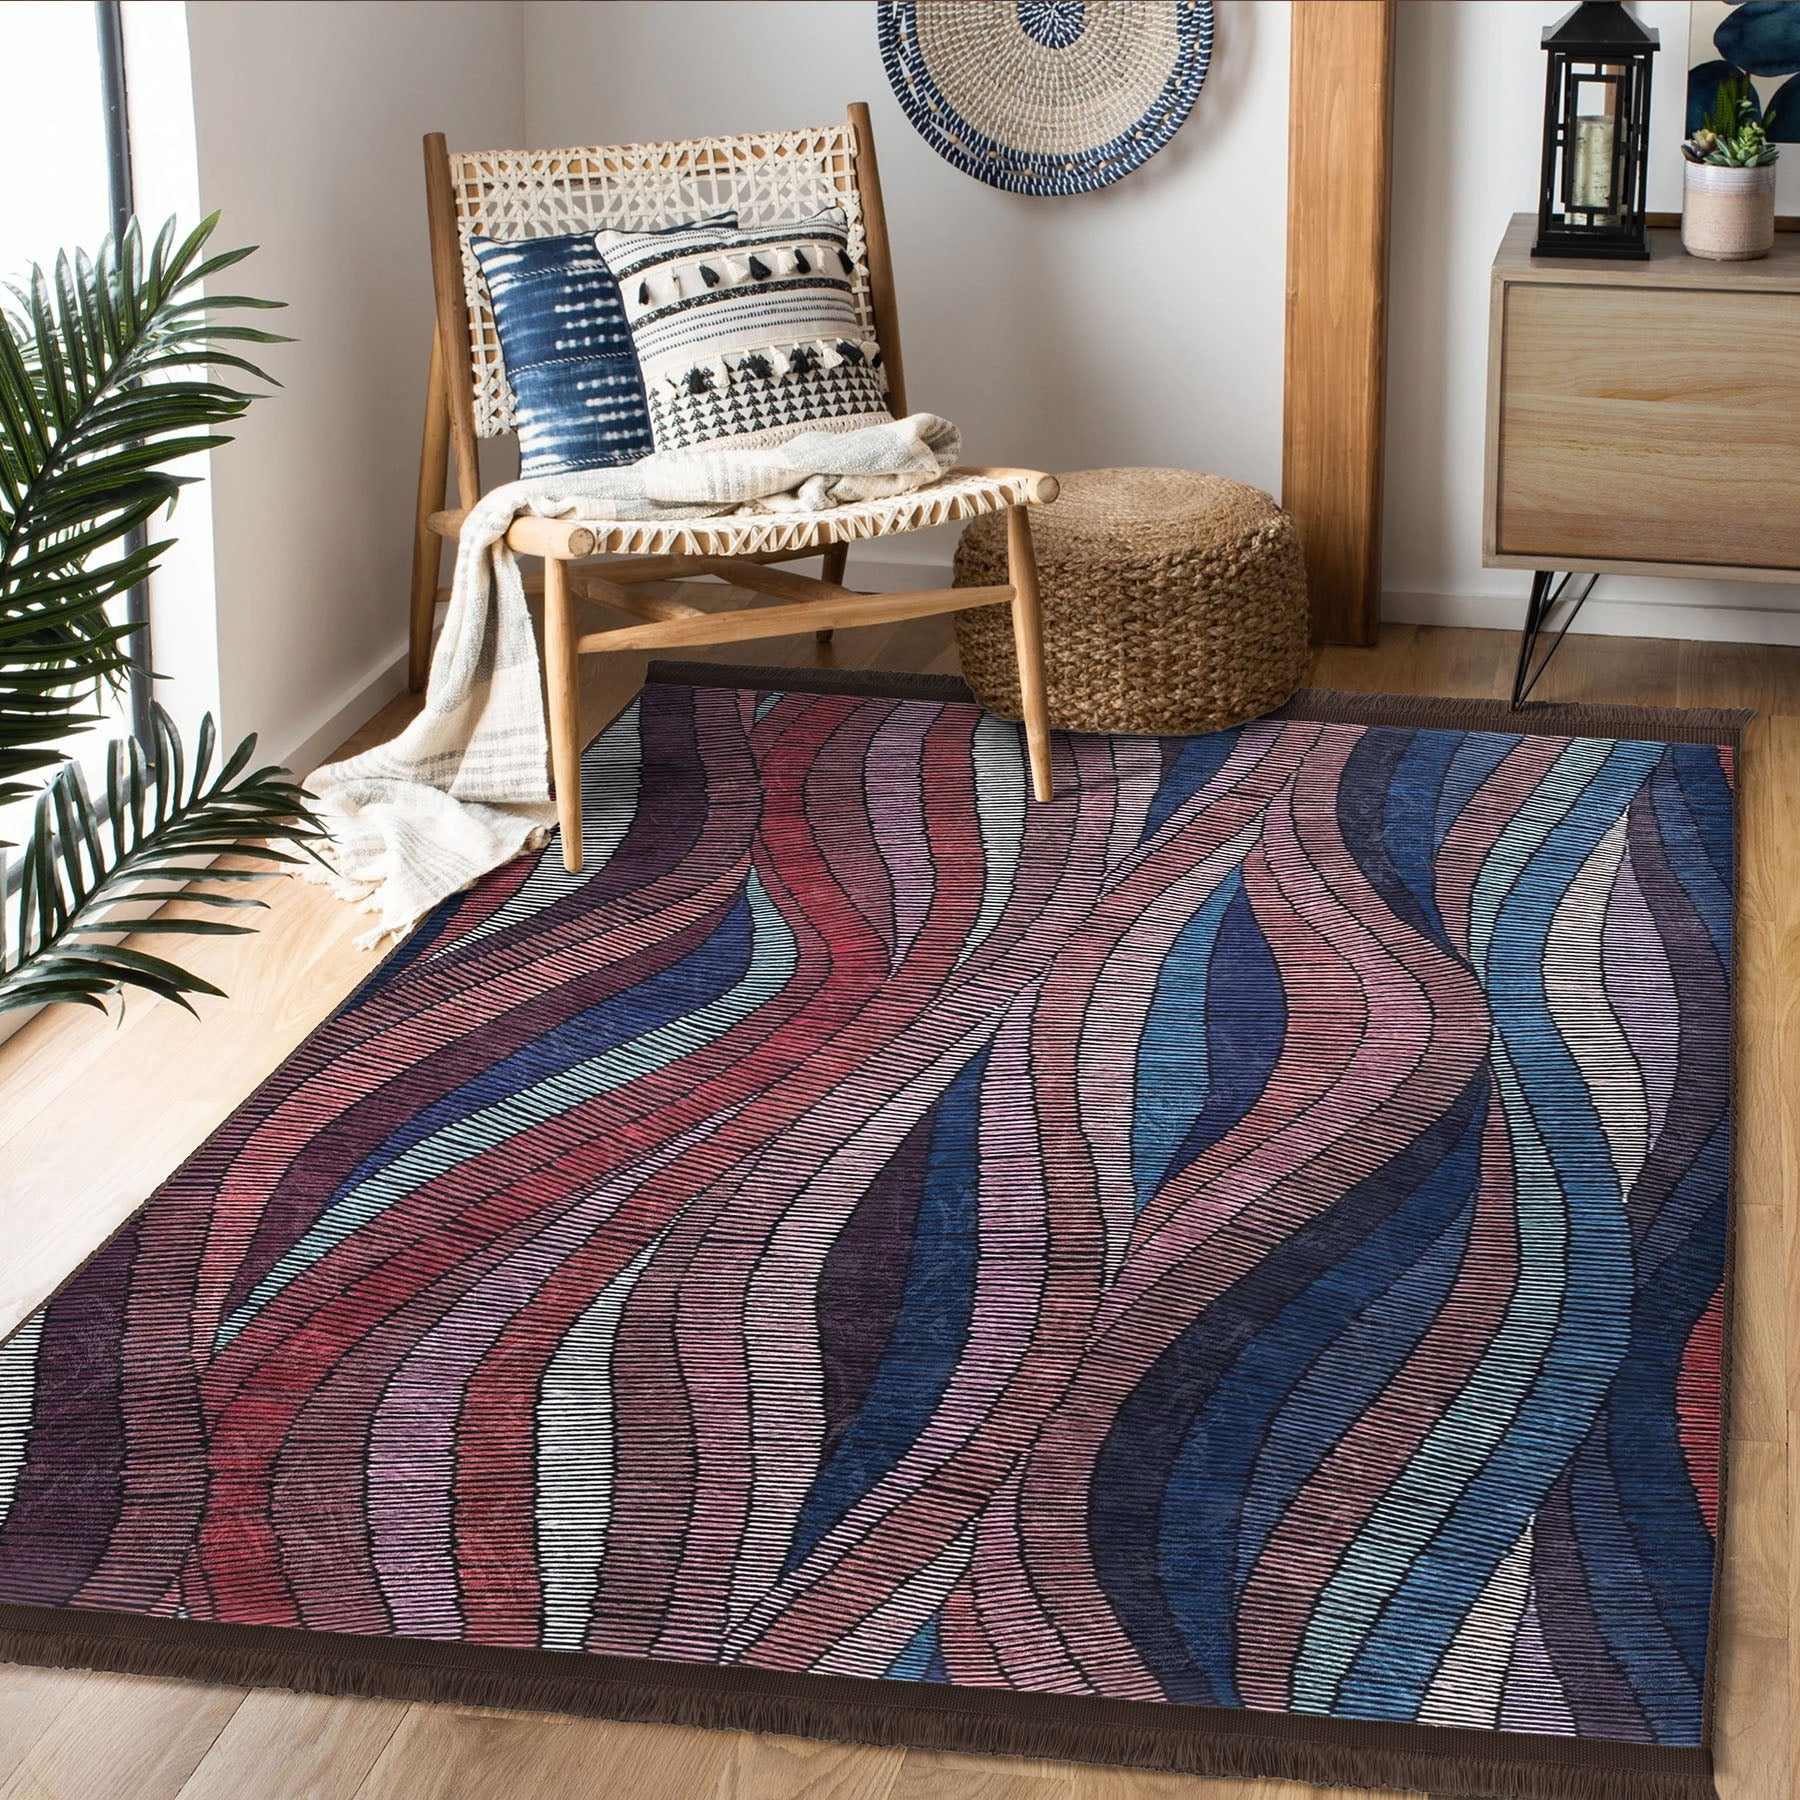 Contemporary Fluidity Rug with Wave Design